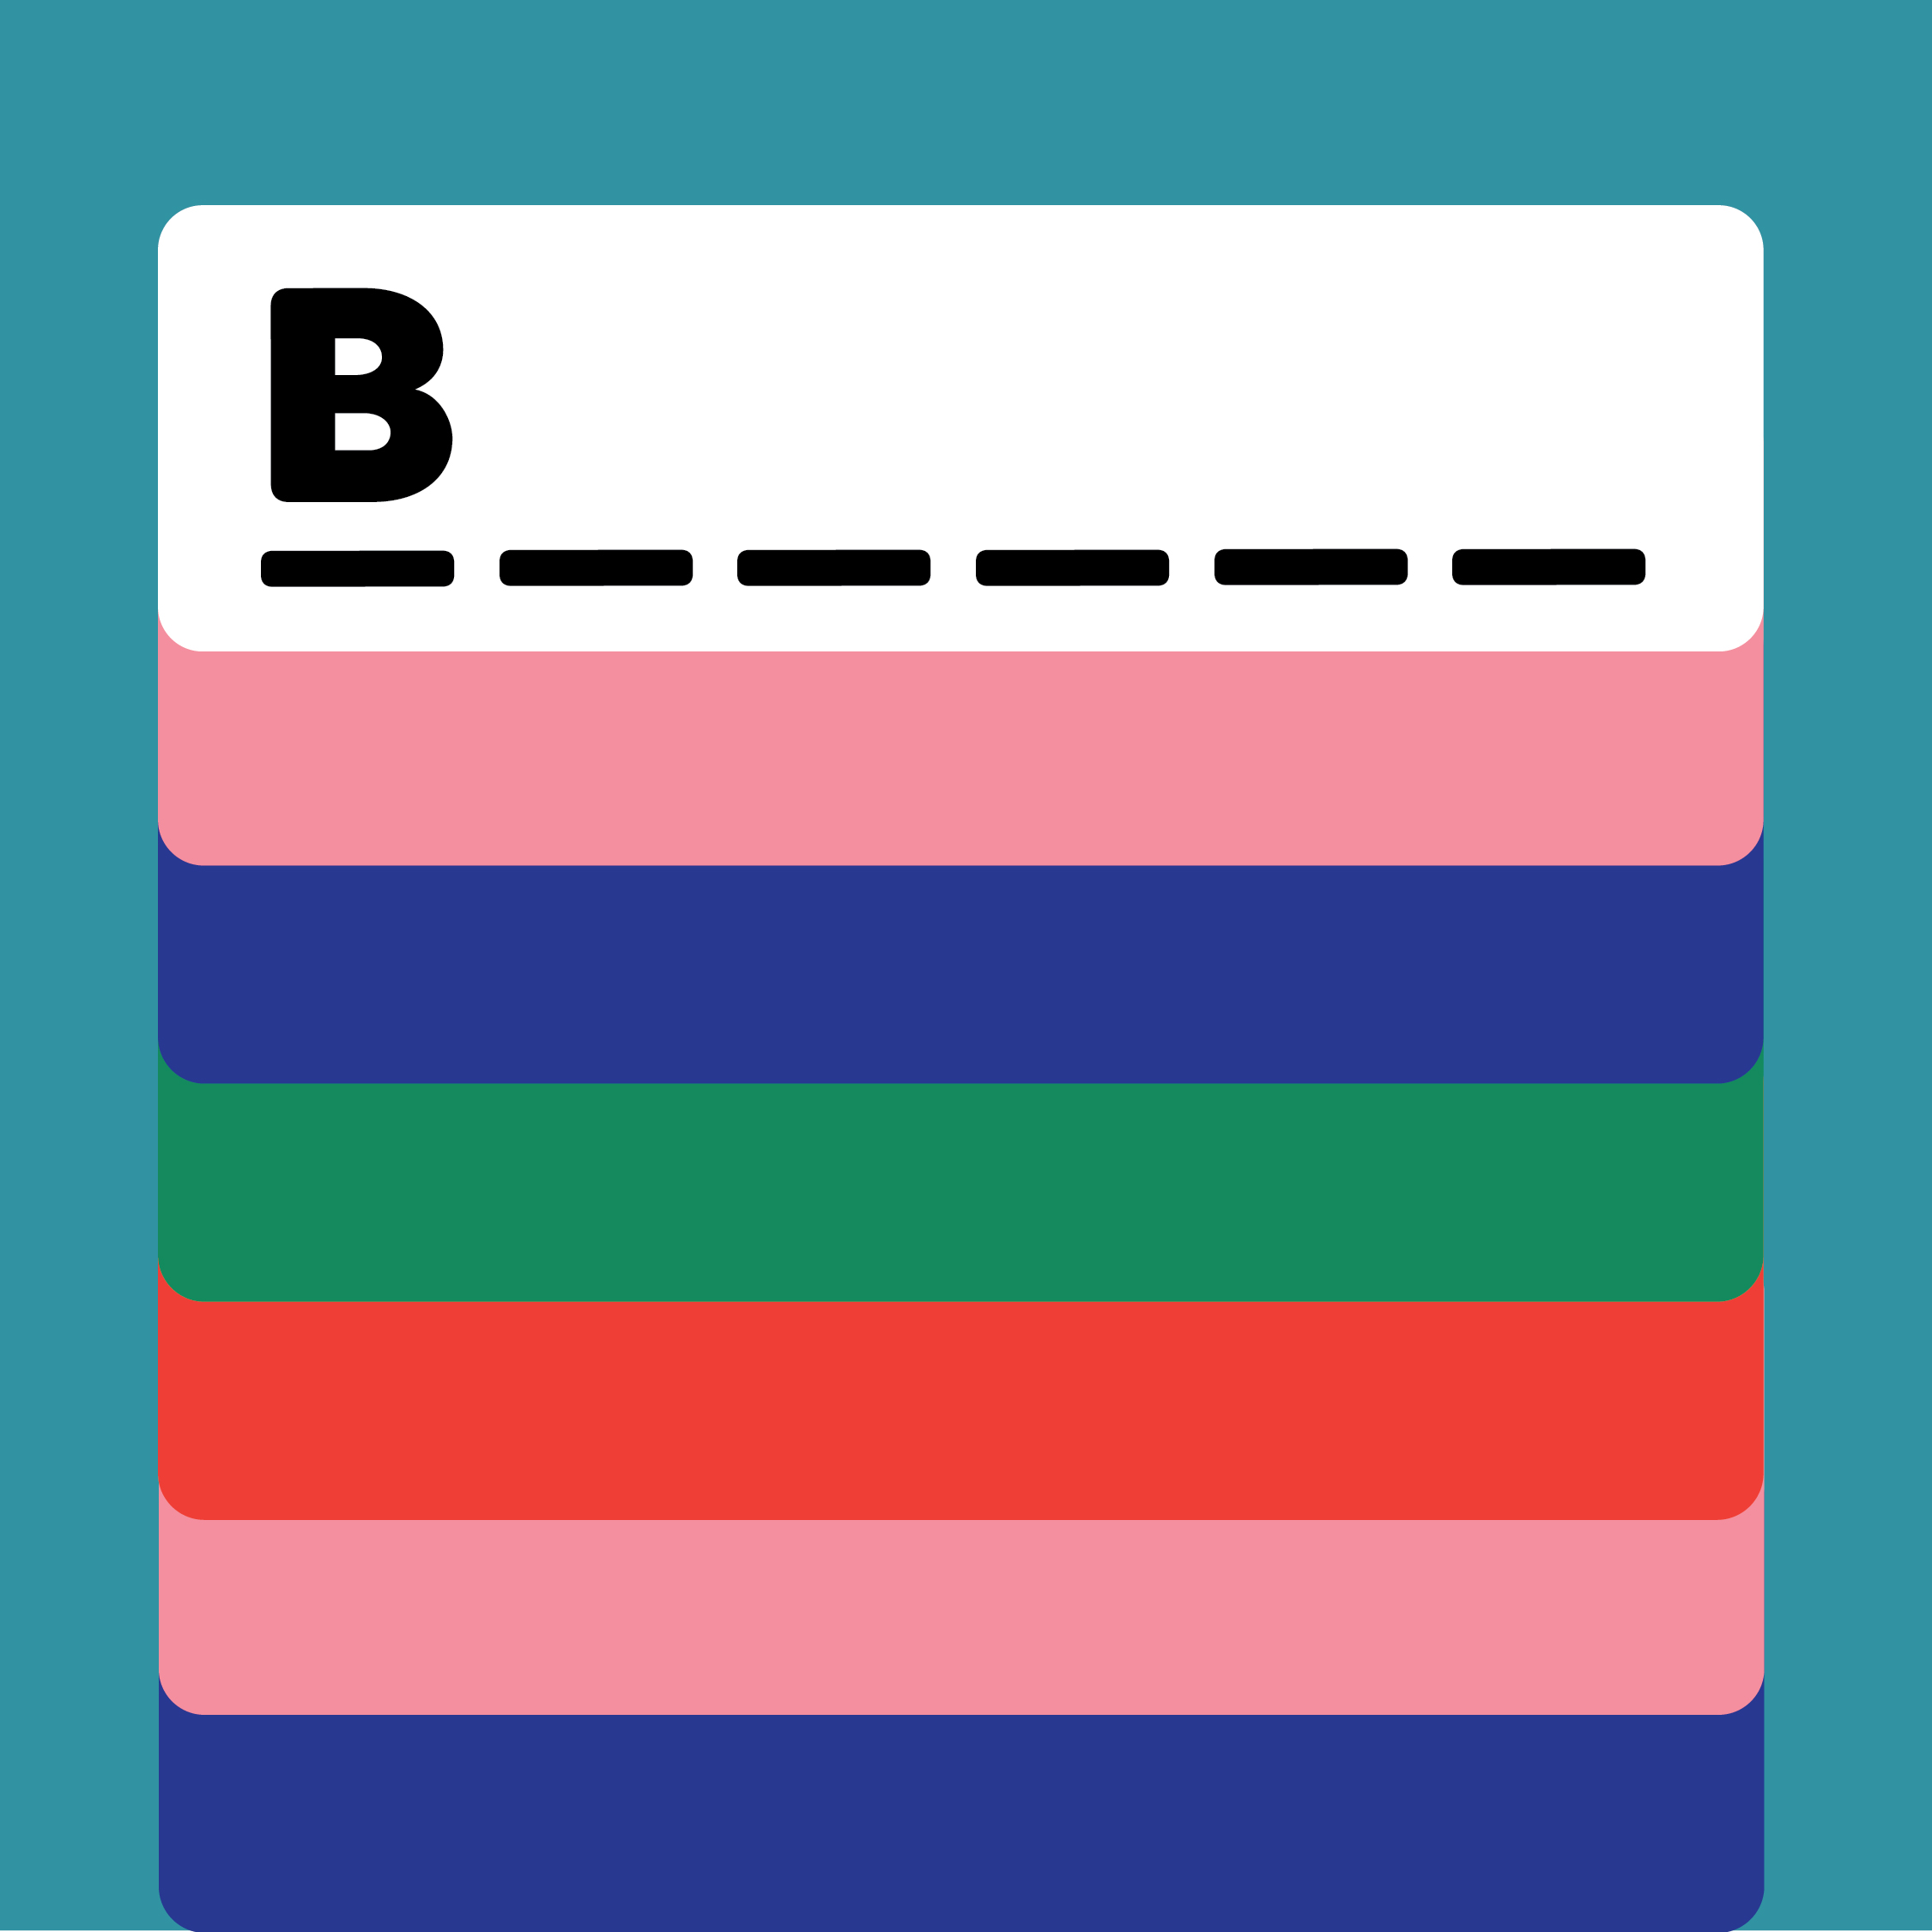 Letter B followed by 5 blank spaces with colorful tabs on a teal background